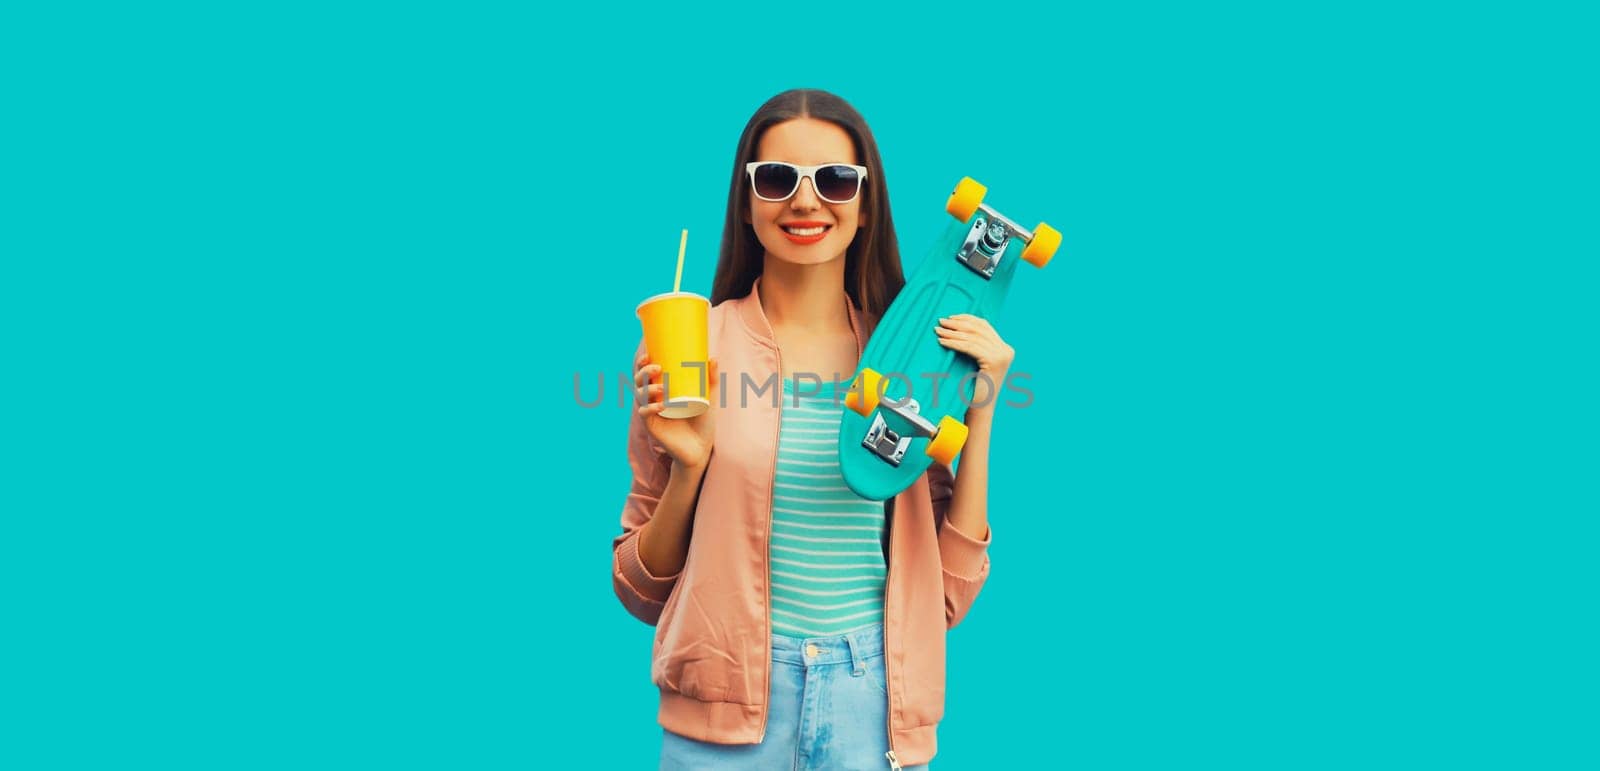 Portrait of stylish young woman with skateboard drinking juice on blue background